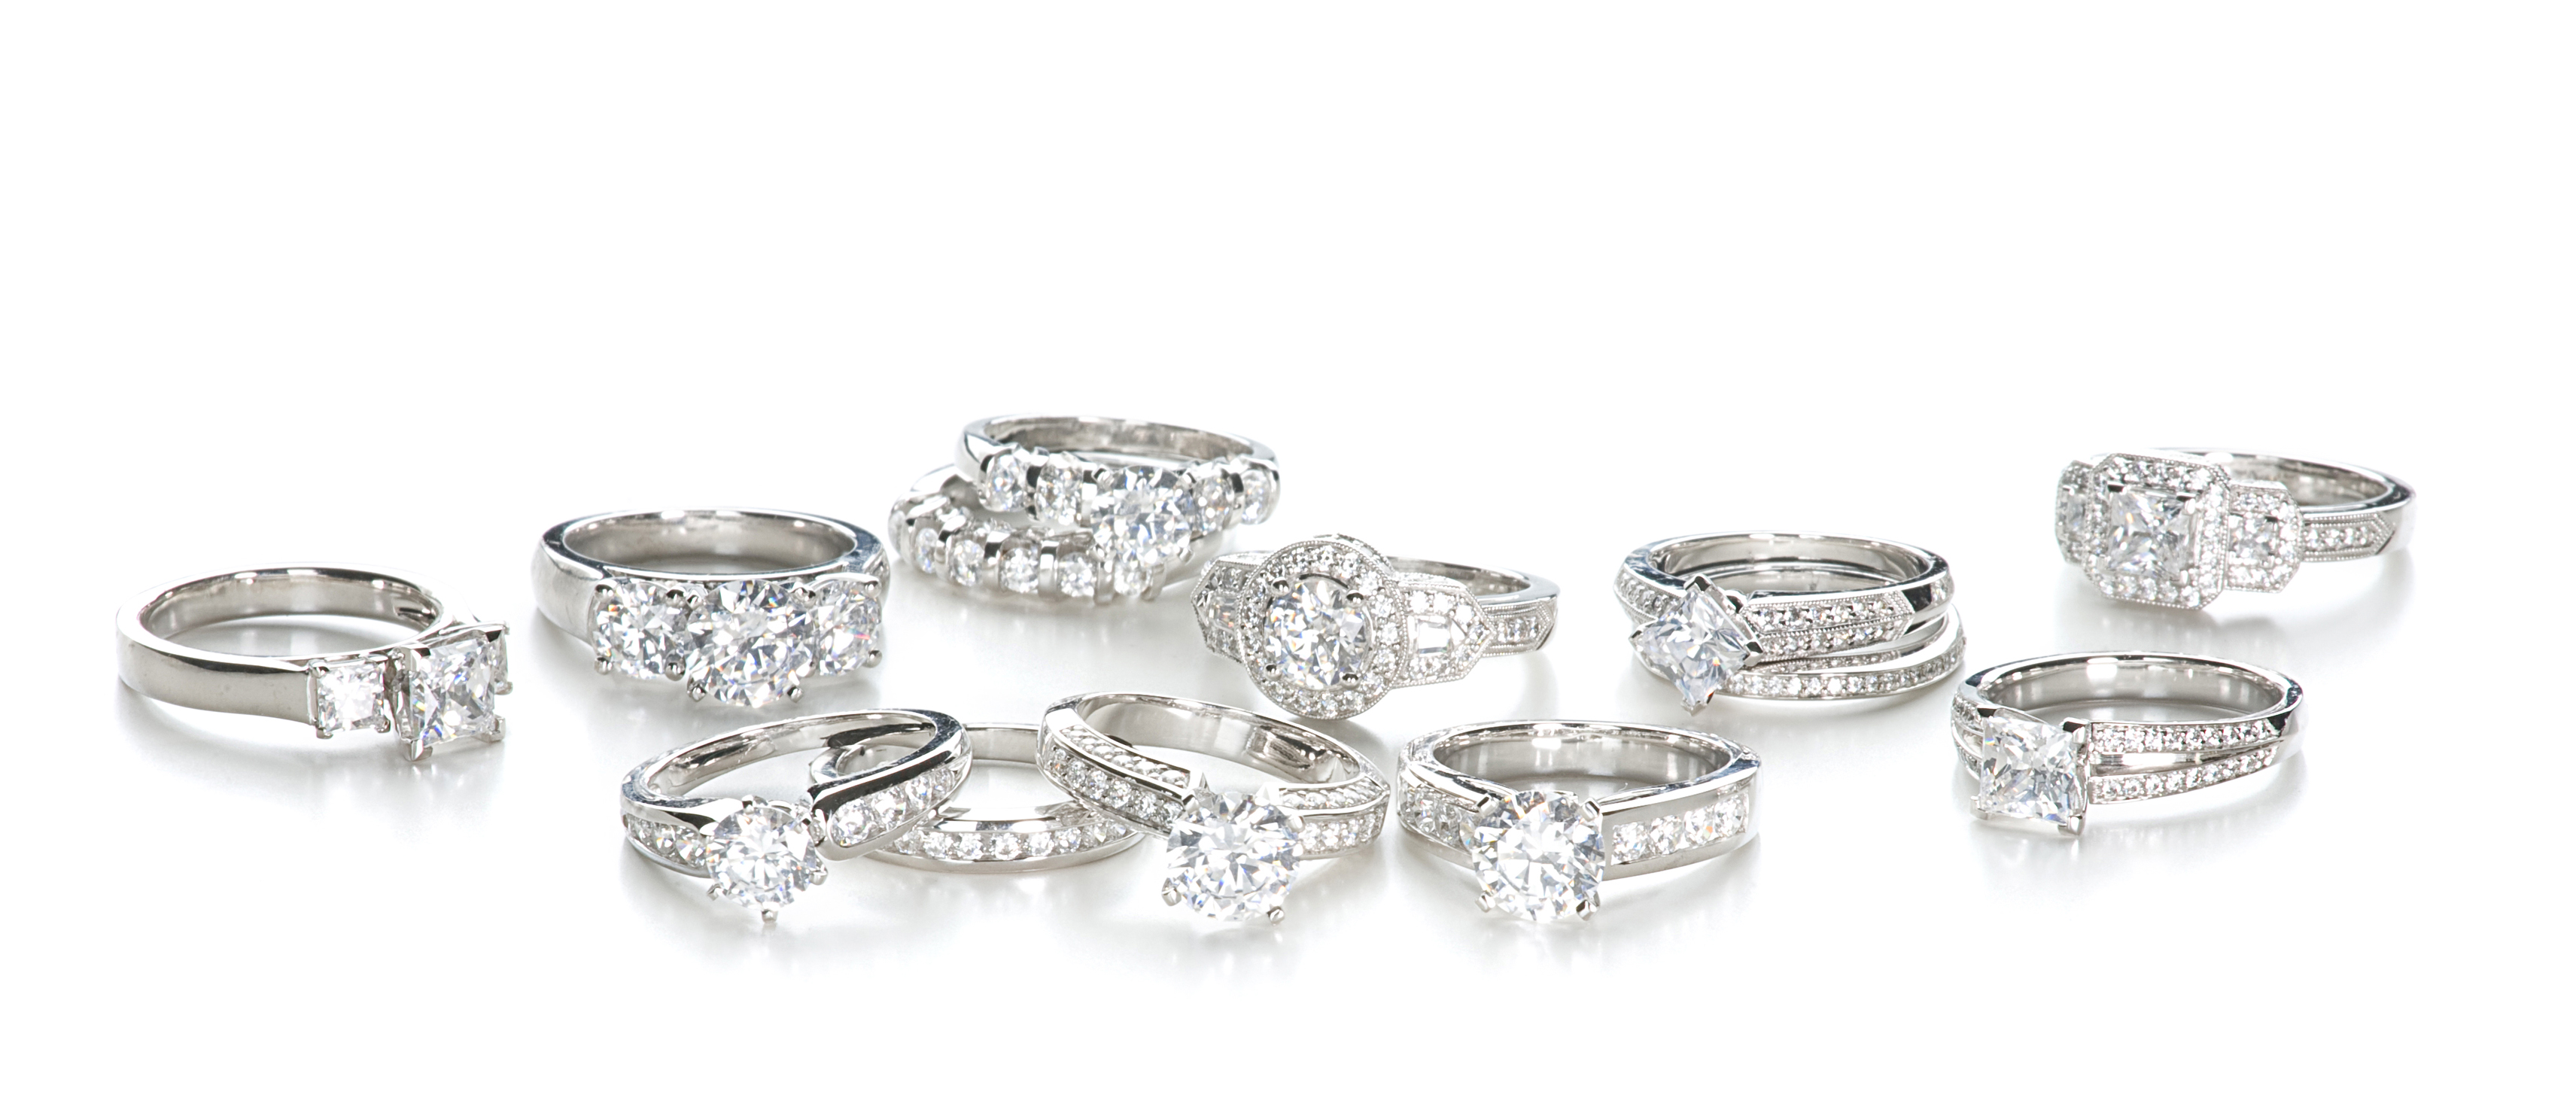 Create Your Own Engagement Ring Select your ring setting and pair it with your ideal diamond. Scores Jewelers Anderson, SC